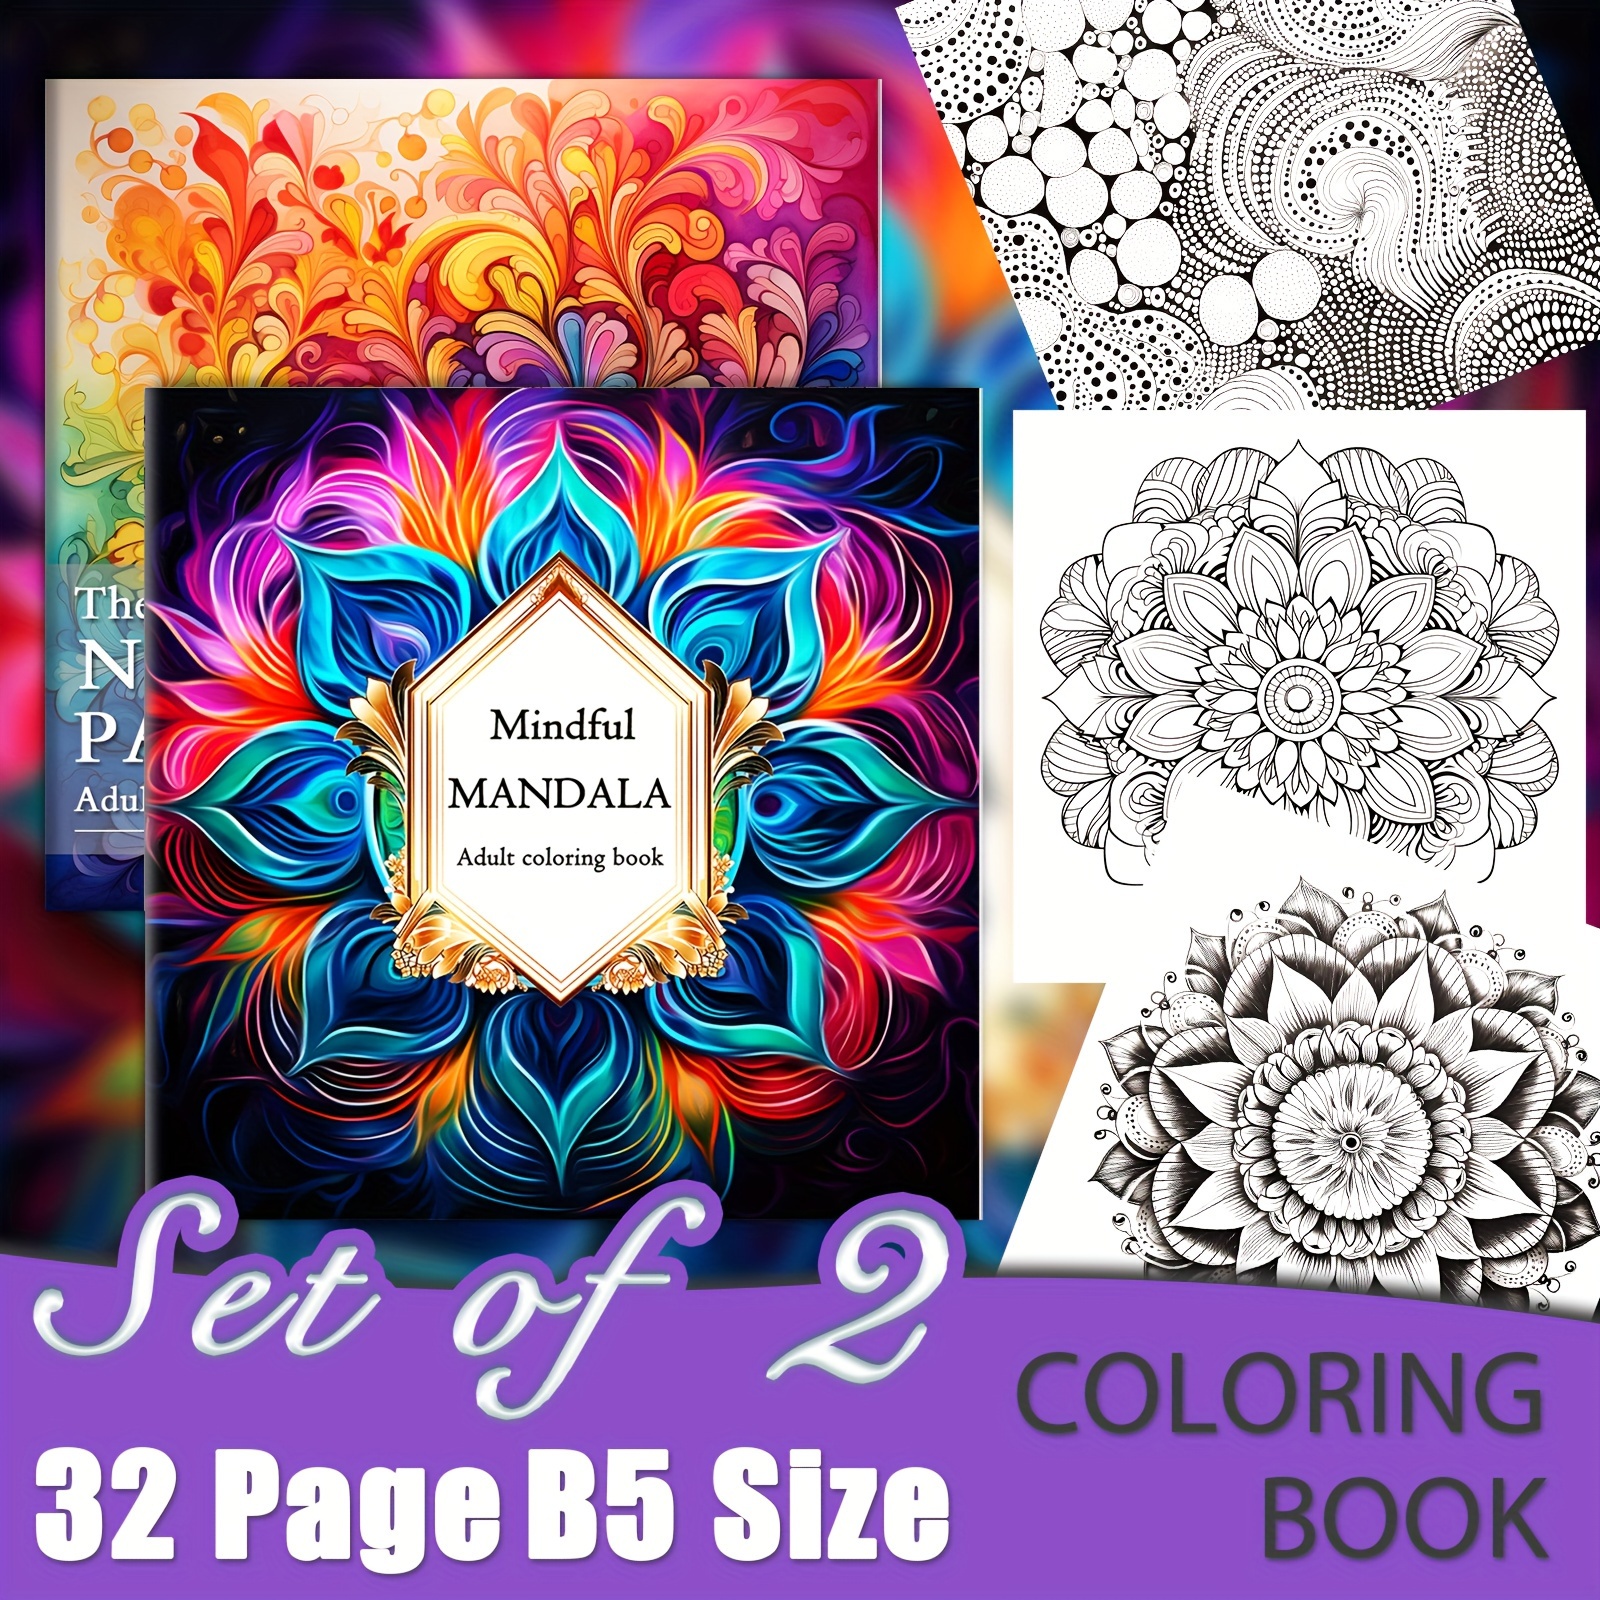 

2 Packs Relaxing Coloring Books For Adult, Nature Patterns And Mandala , 8.2 X 8.2 Inch, Gift For Adult To Relax